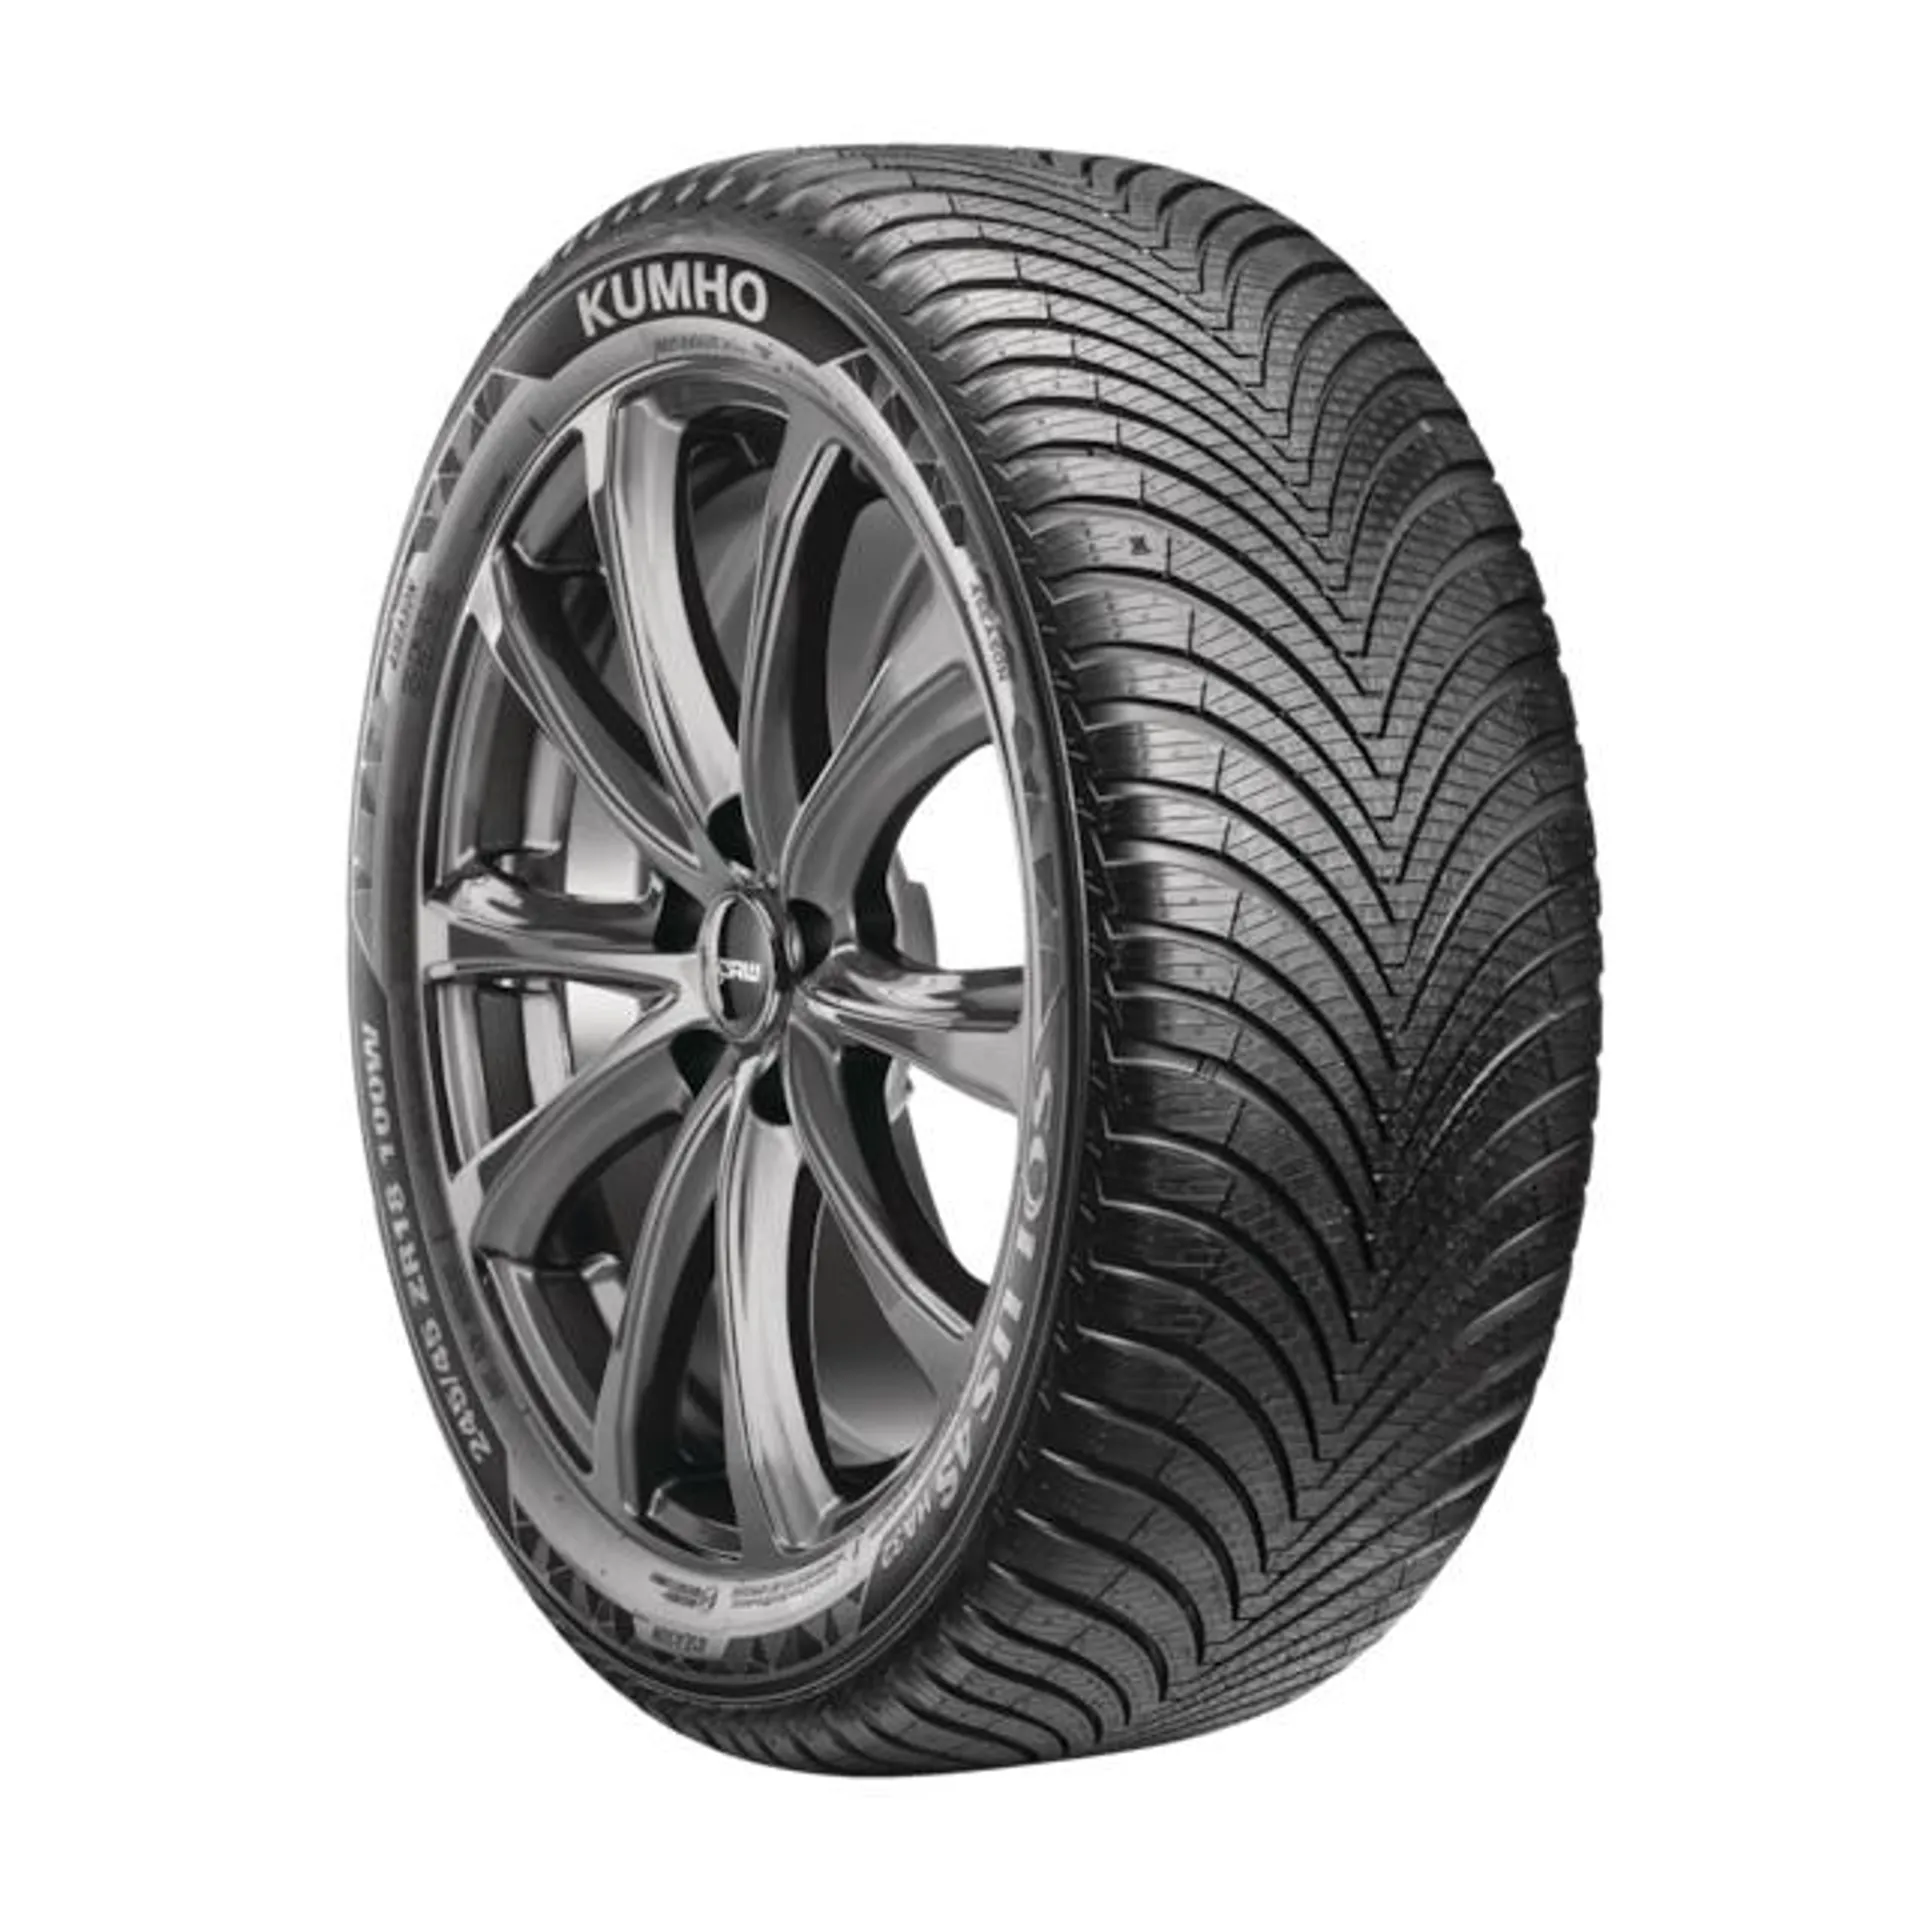 Kumho Solus 4S HA32 All Weather Tire For Passenger & CUV